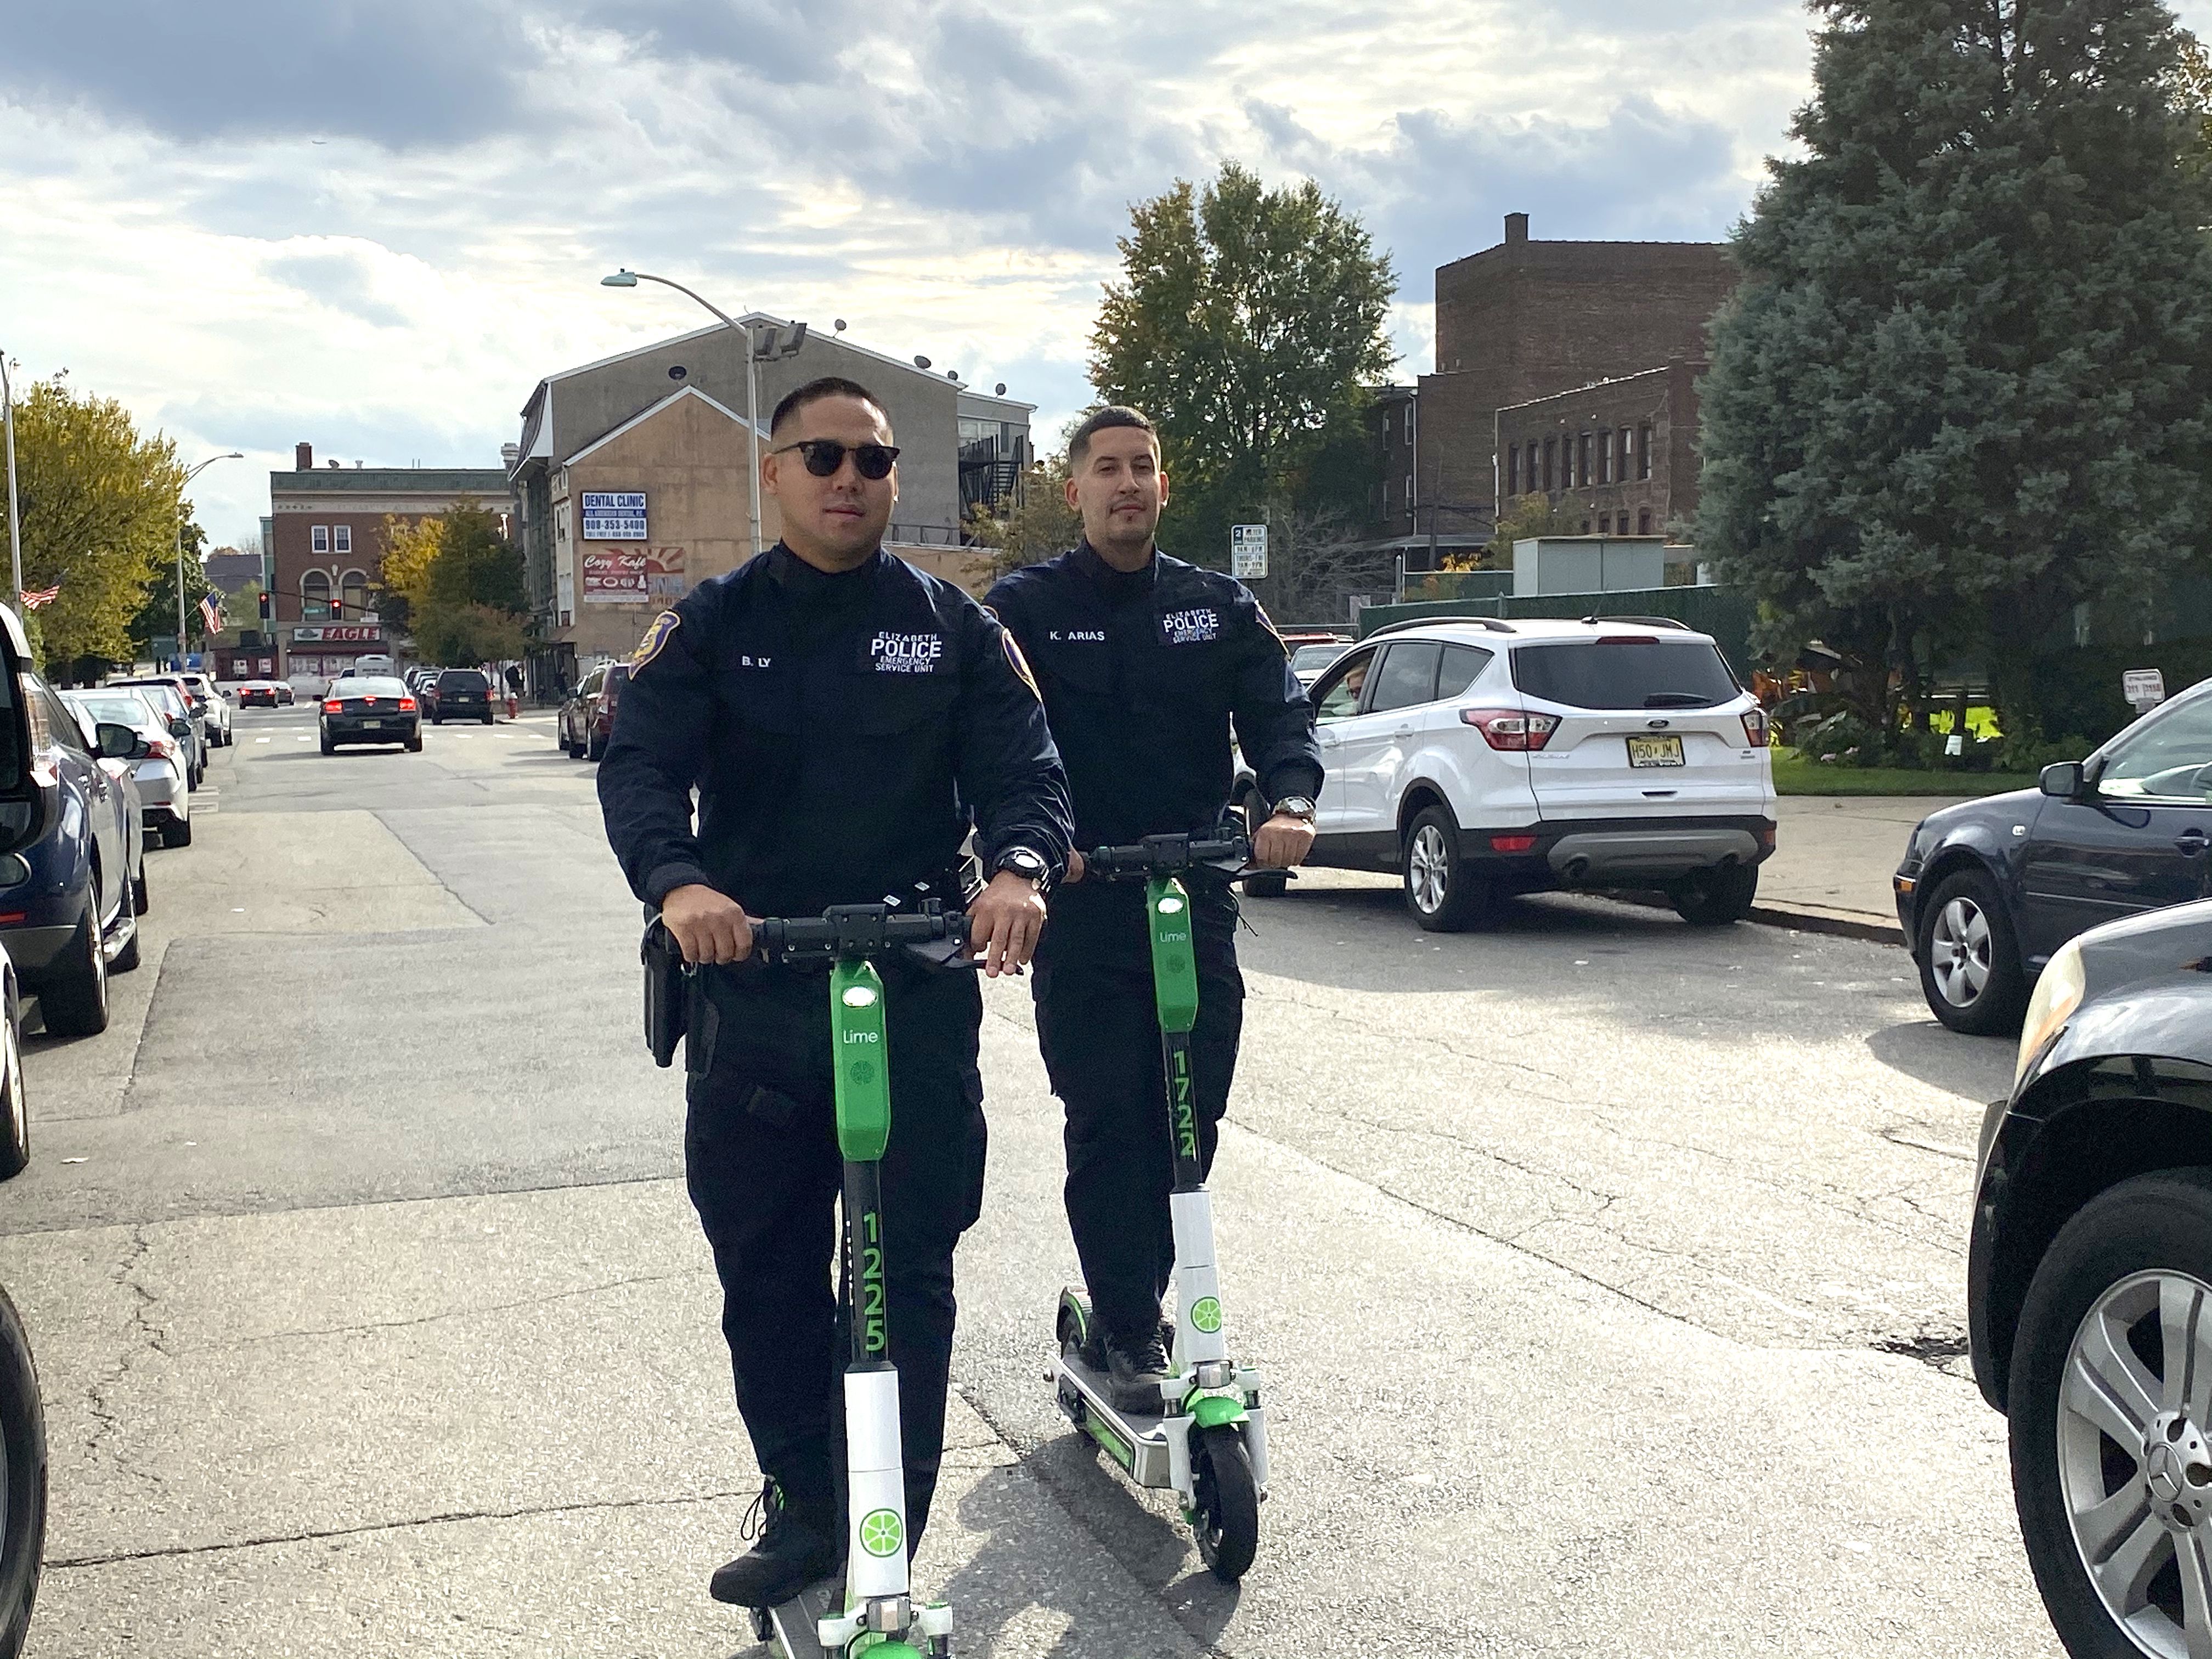 E-scooters are coming another N.J. and cops will be patrolling on them - nj.com